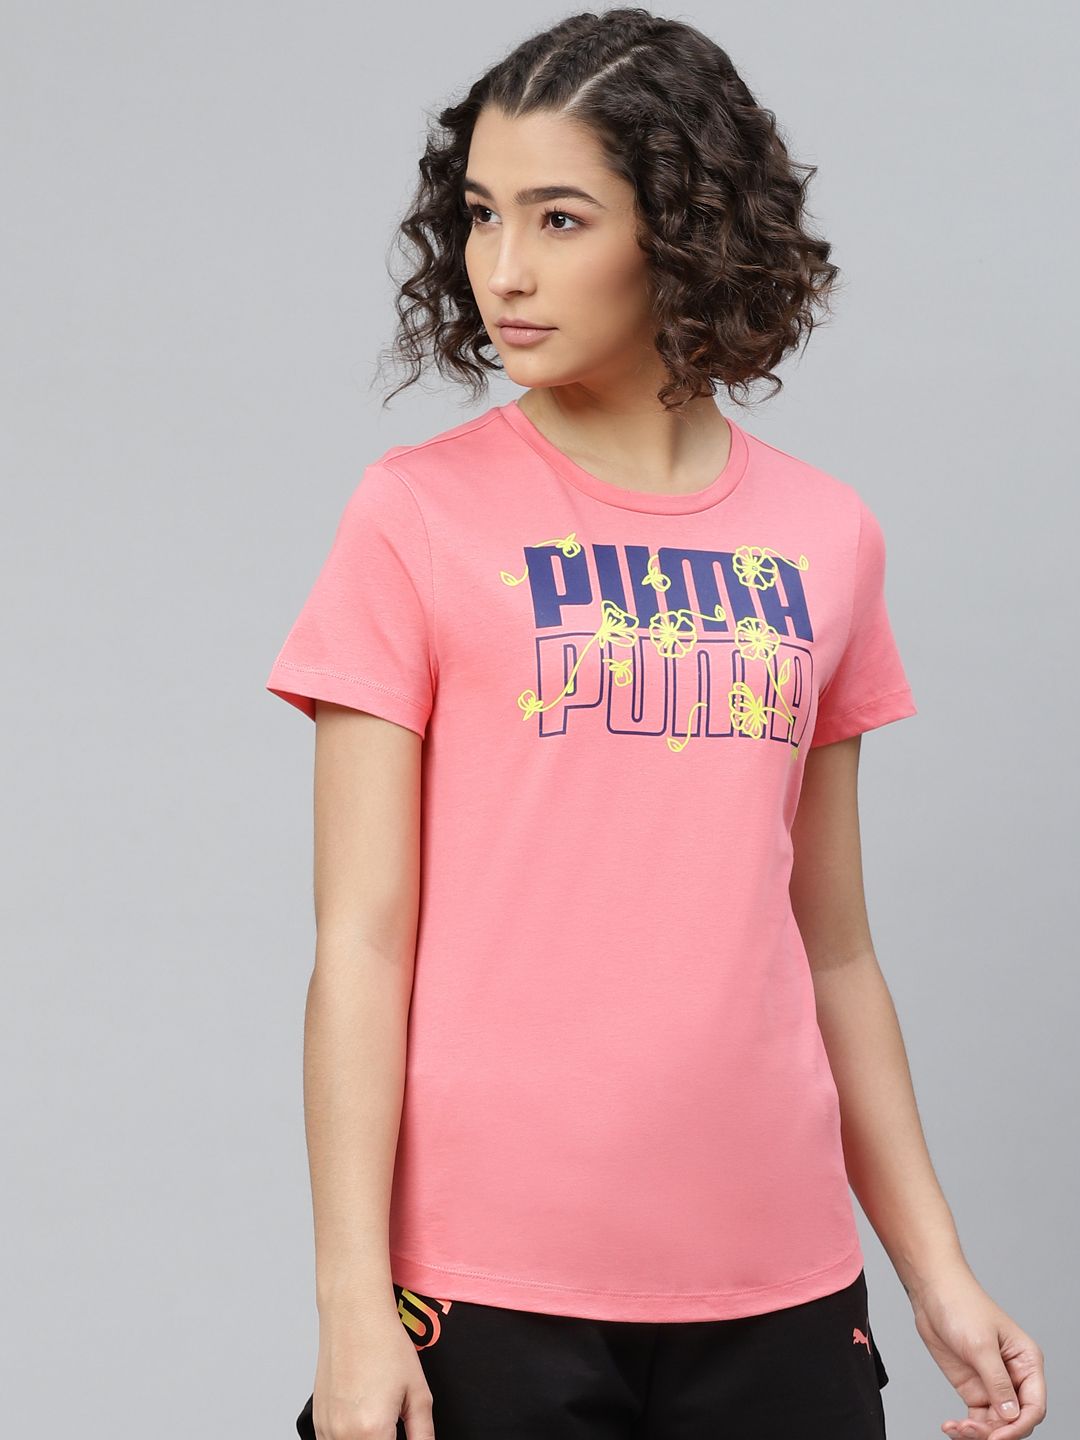 Puma Women Coral Pink Printed Round Neck Pure Cotton T-shirt Price in India